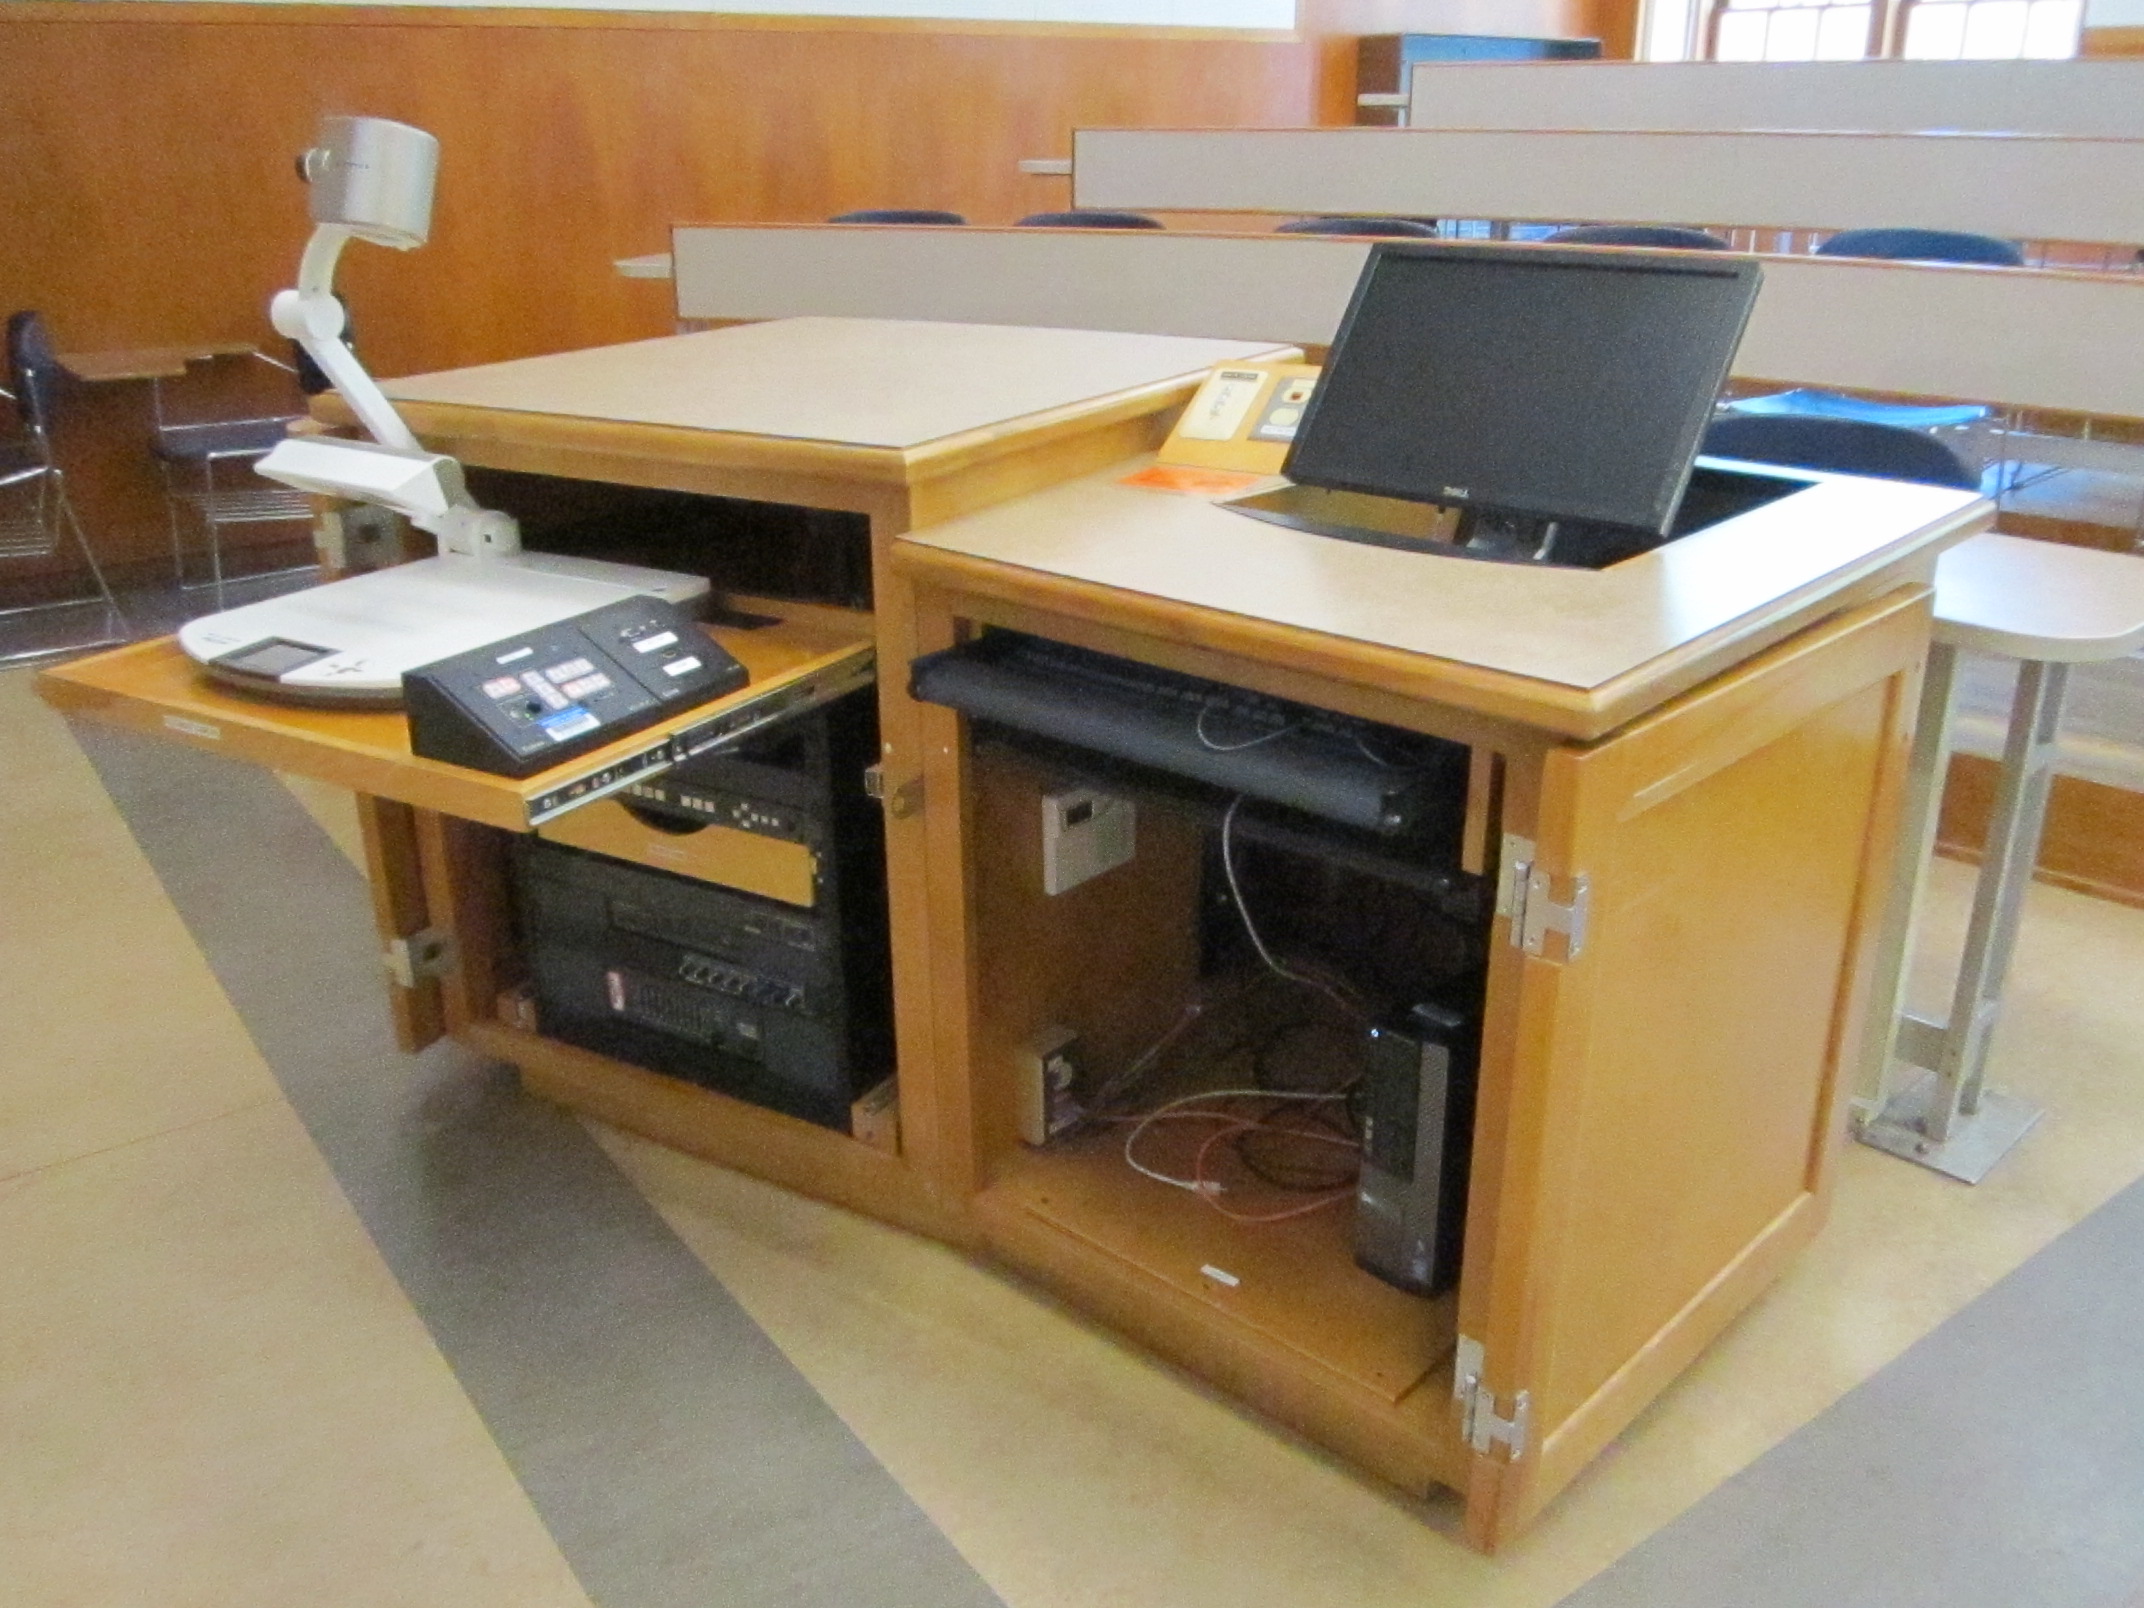 A view of the open cabinet with a computer monitor, HDMI inputs, a push button controller, document camera, audio visual rack and electric screen controls.